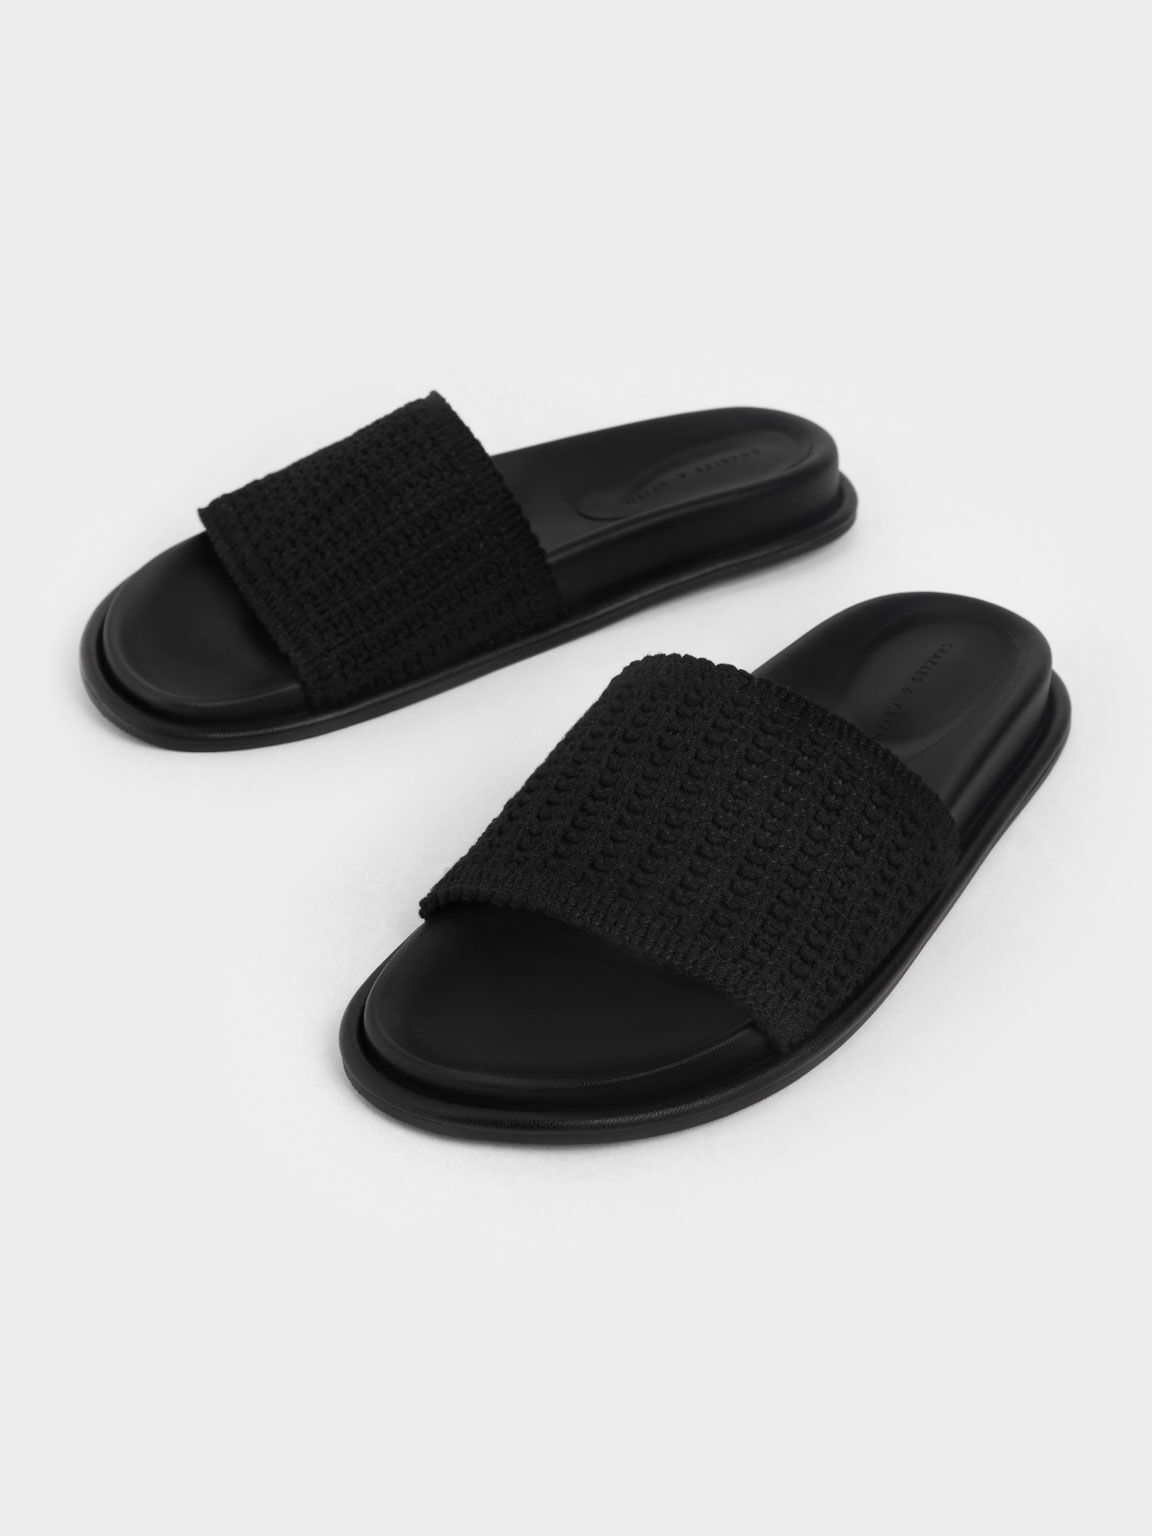 Women's Sandals | Shop Exclusive Styles - CHARLES & KEITH US